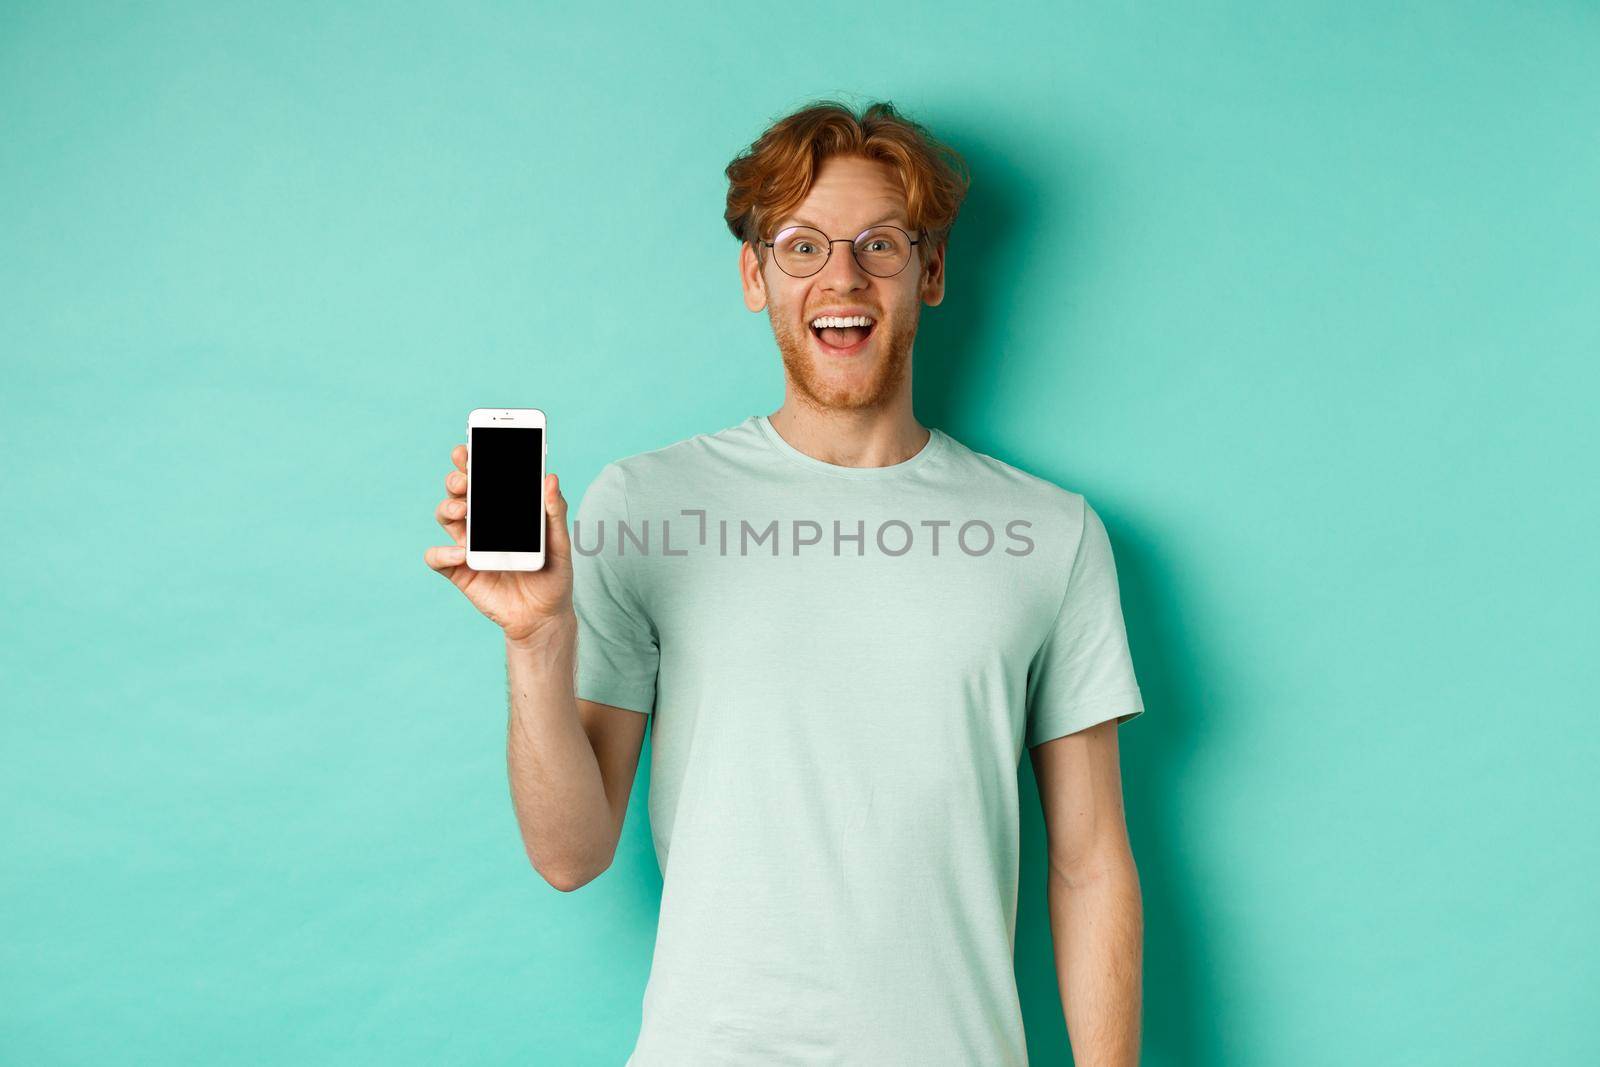 Online shopping. Cheerful redhead man in glasses and t-shirt showing smartphone screen and smiling, standing over mint background.